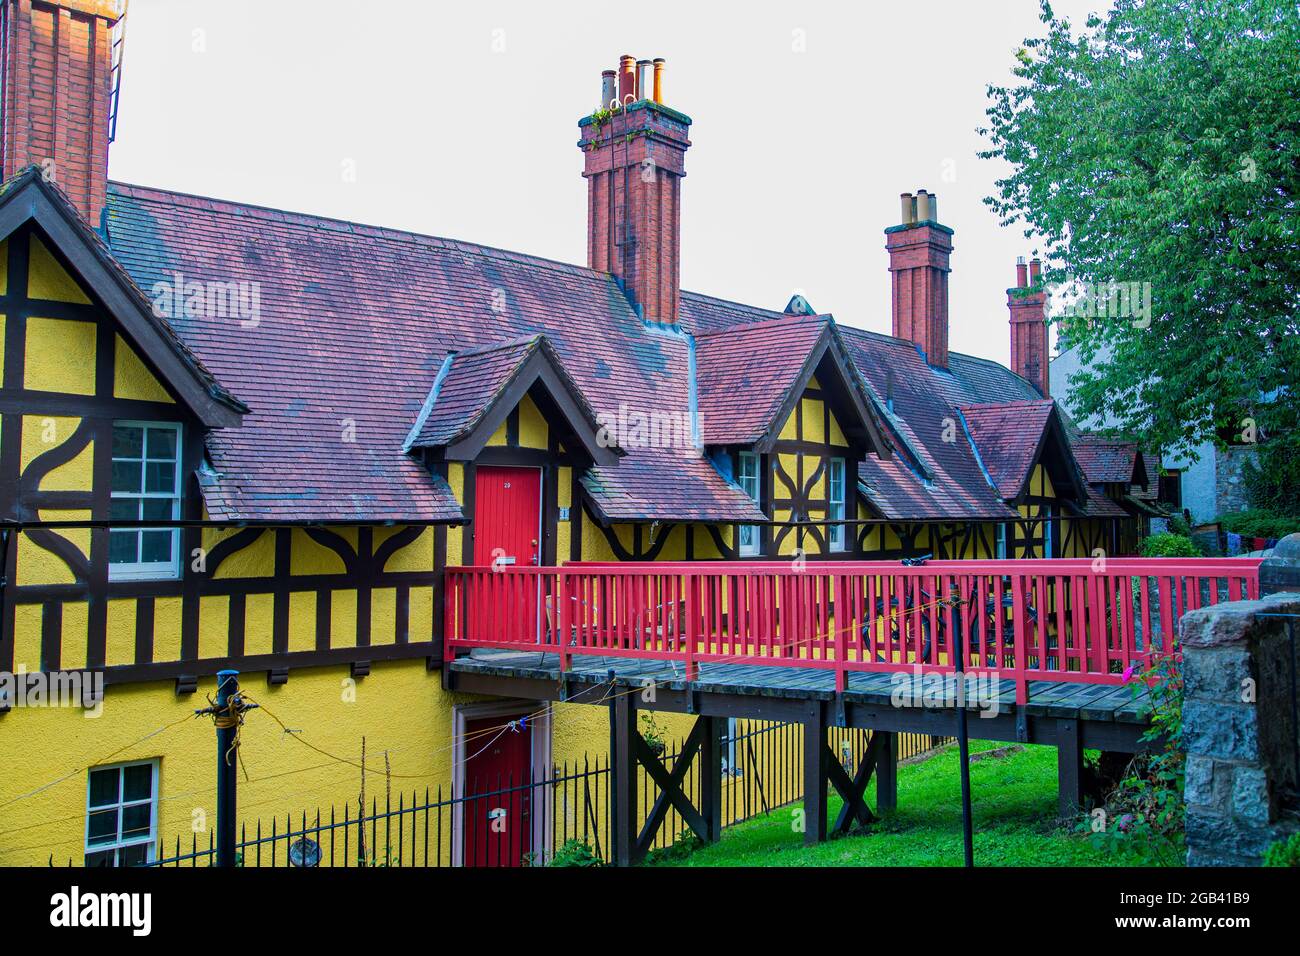 Wooden walkway with red railings, to house with yellow facade and gabled roof Stock Photo